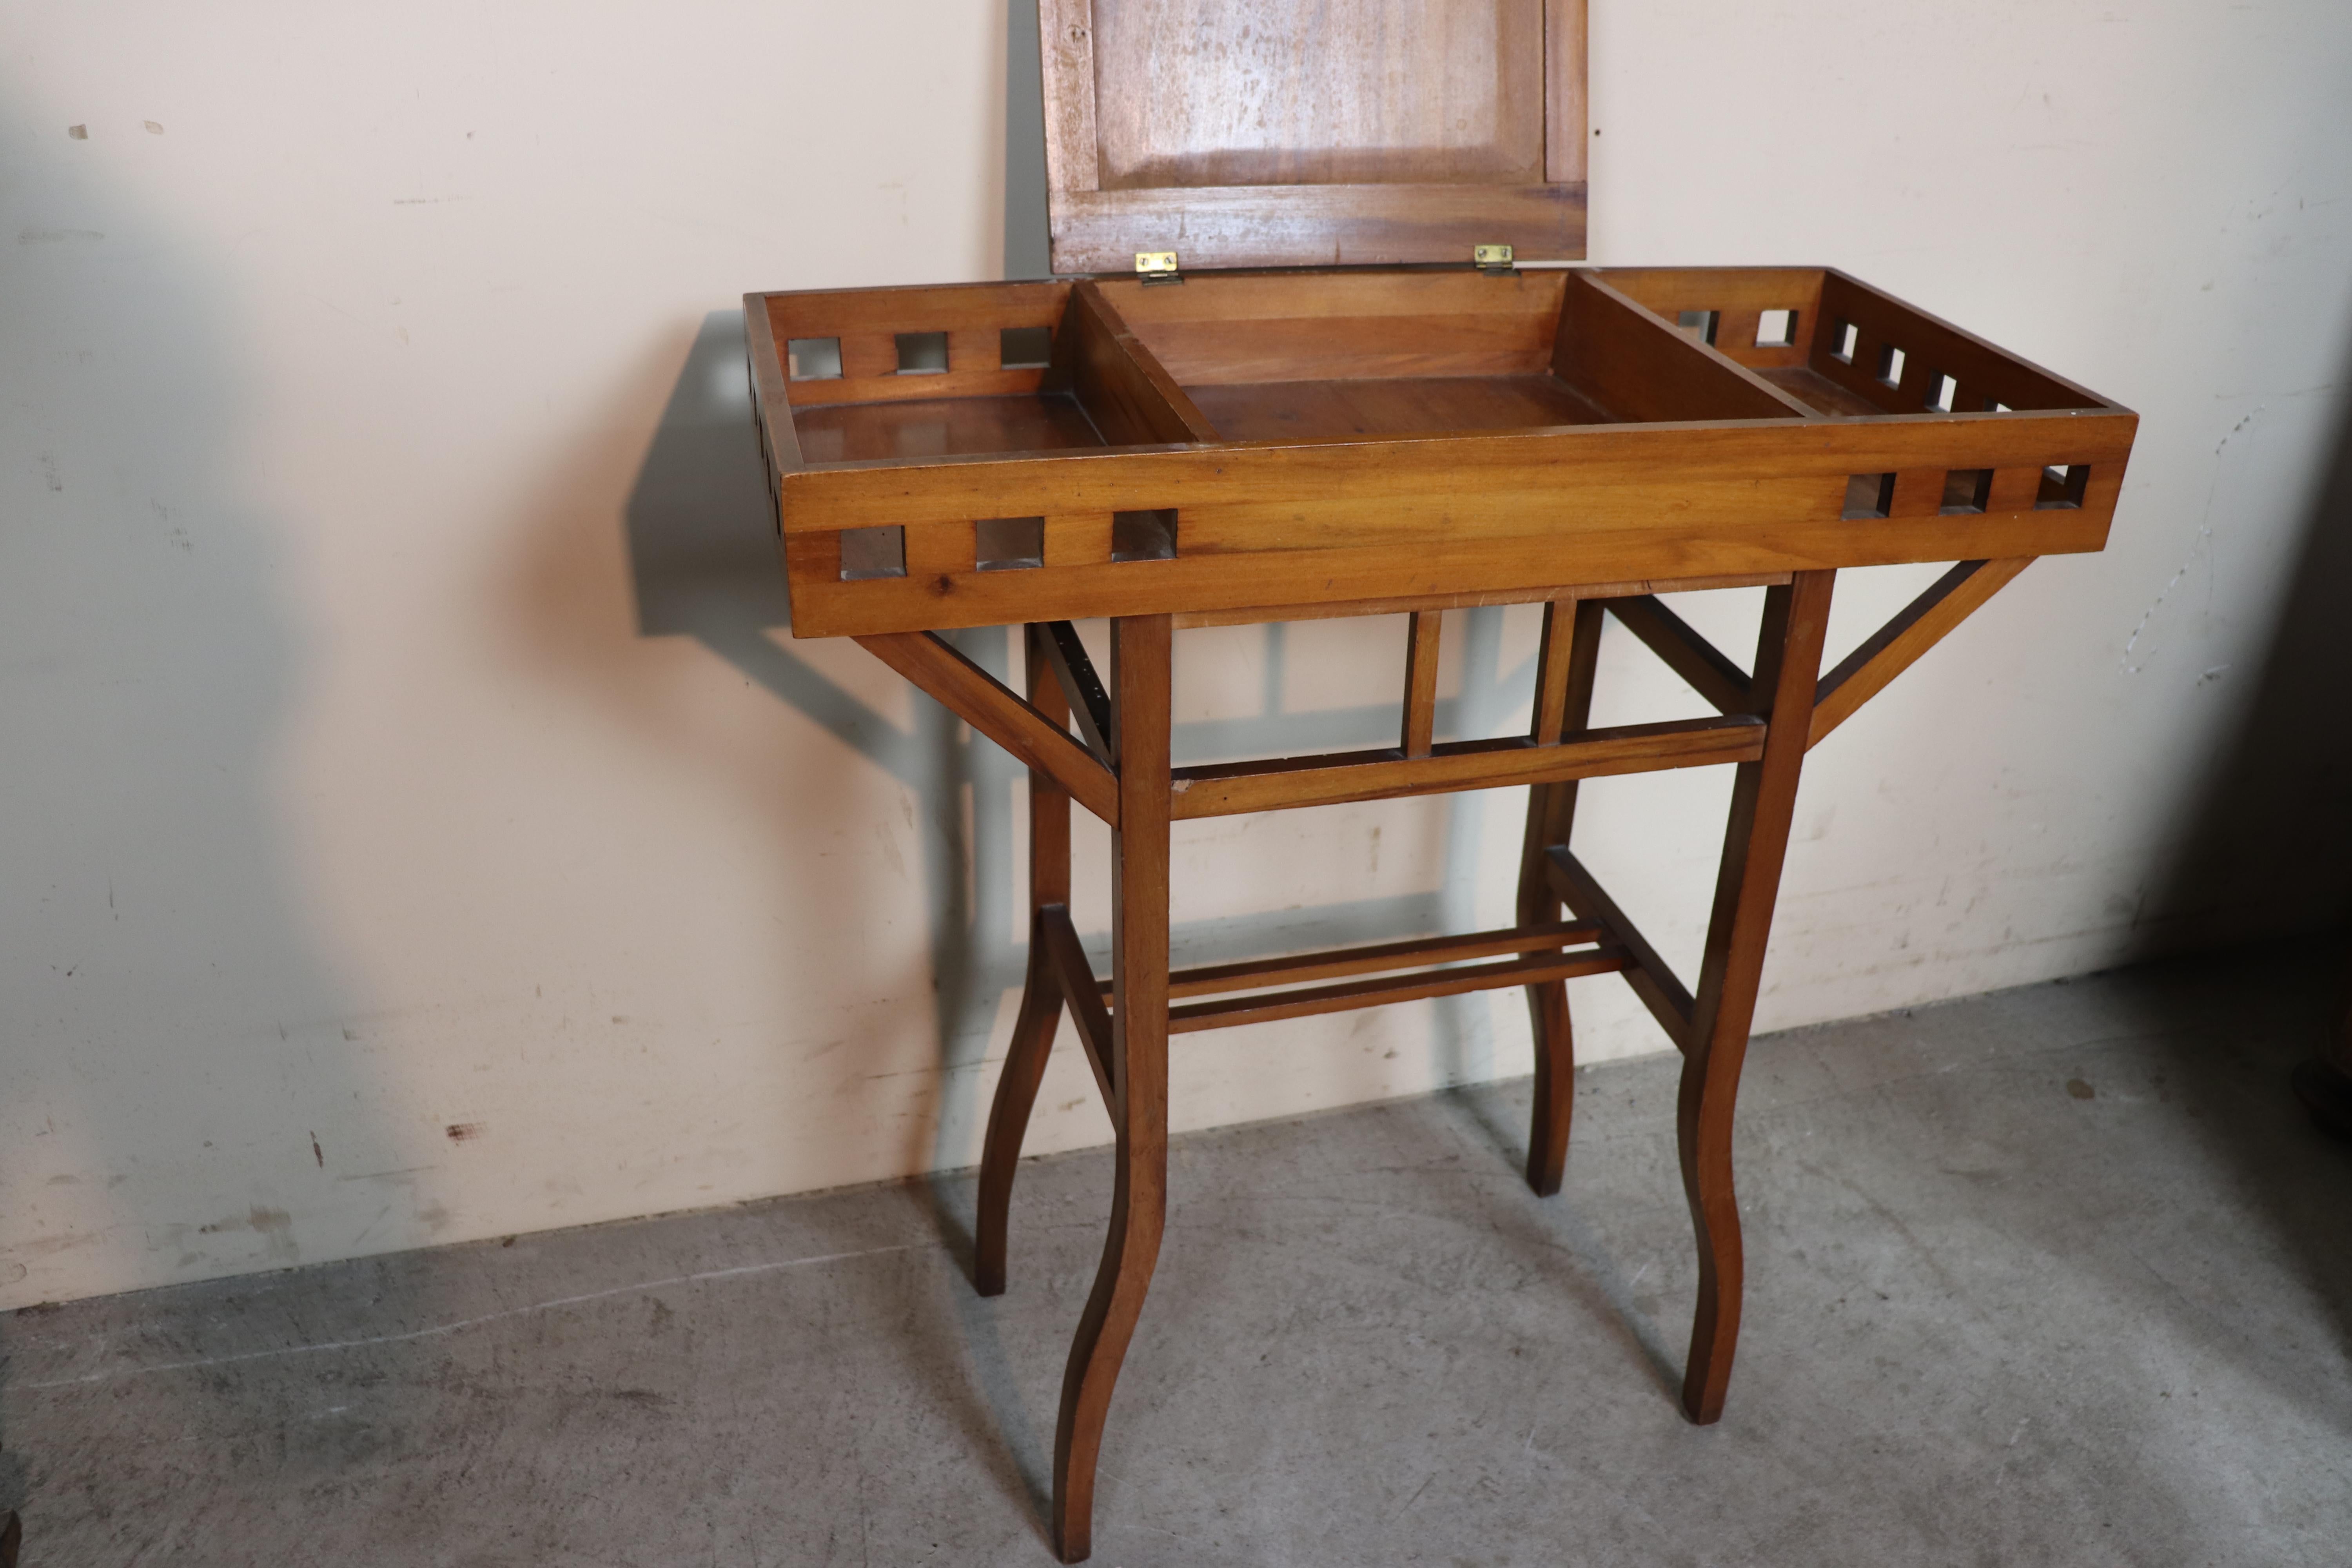 Cherry 20th Century Italian Art Nouveau Sewing Table or Side Table